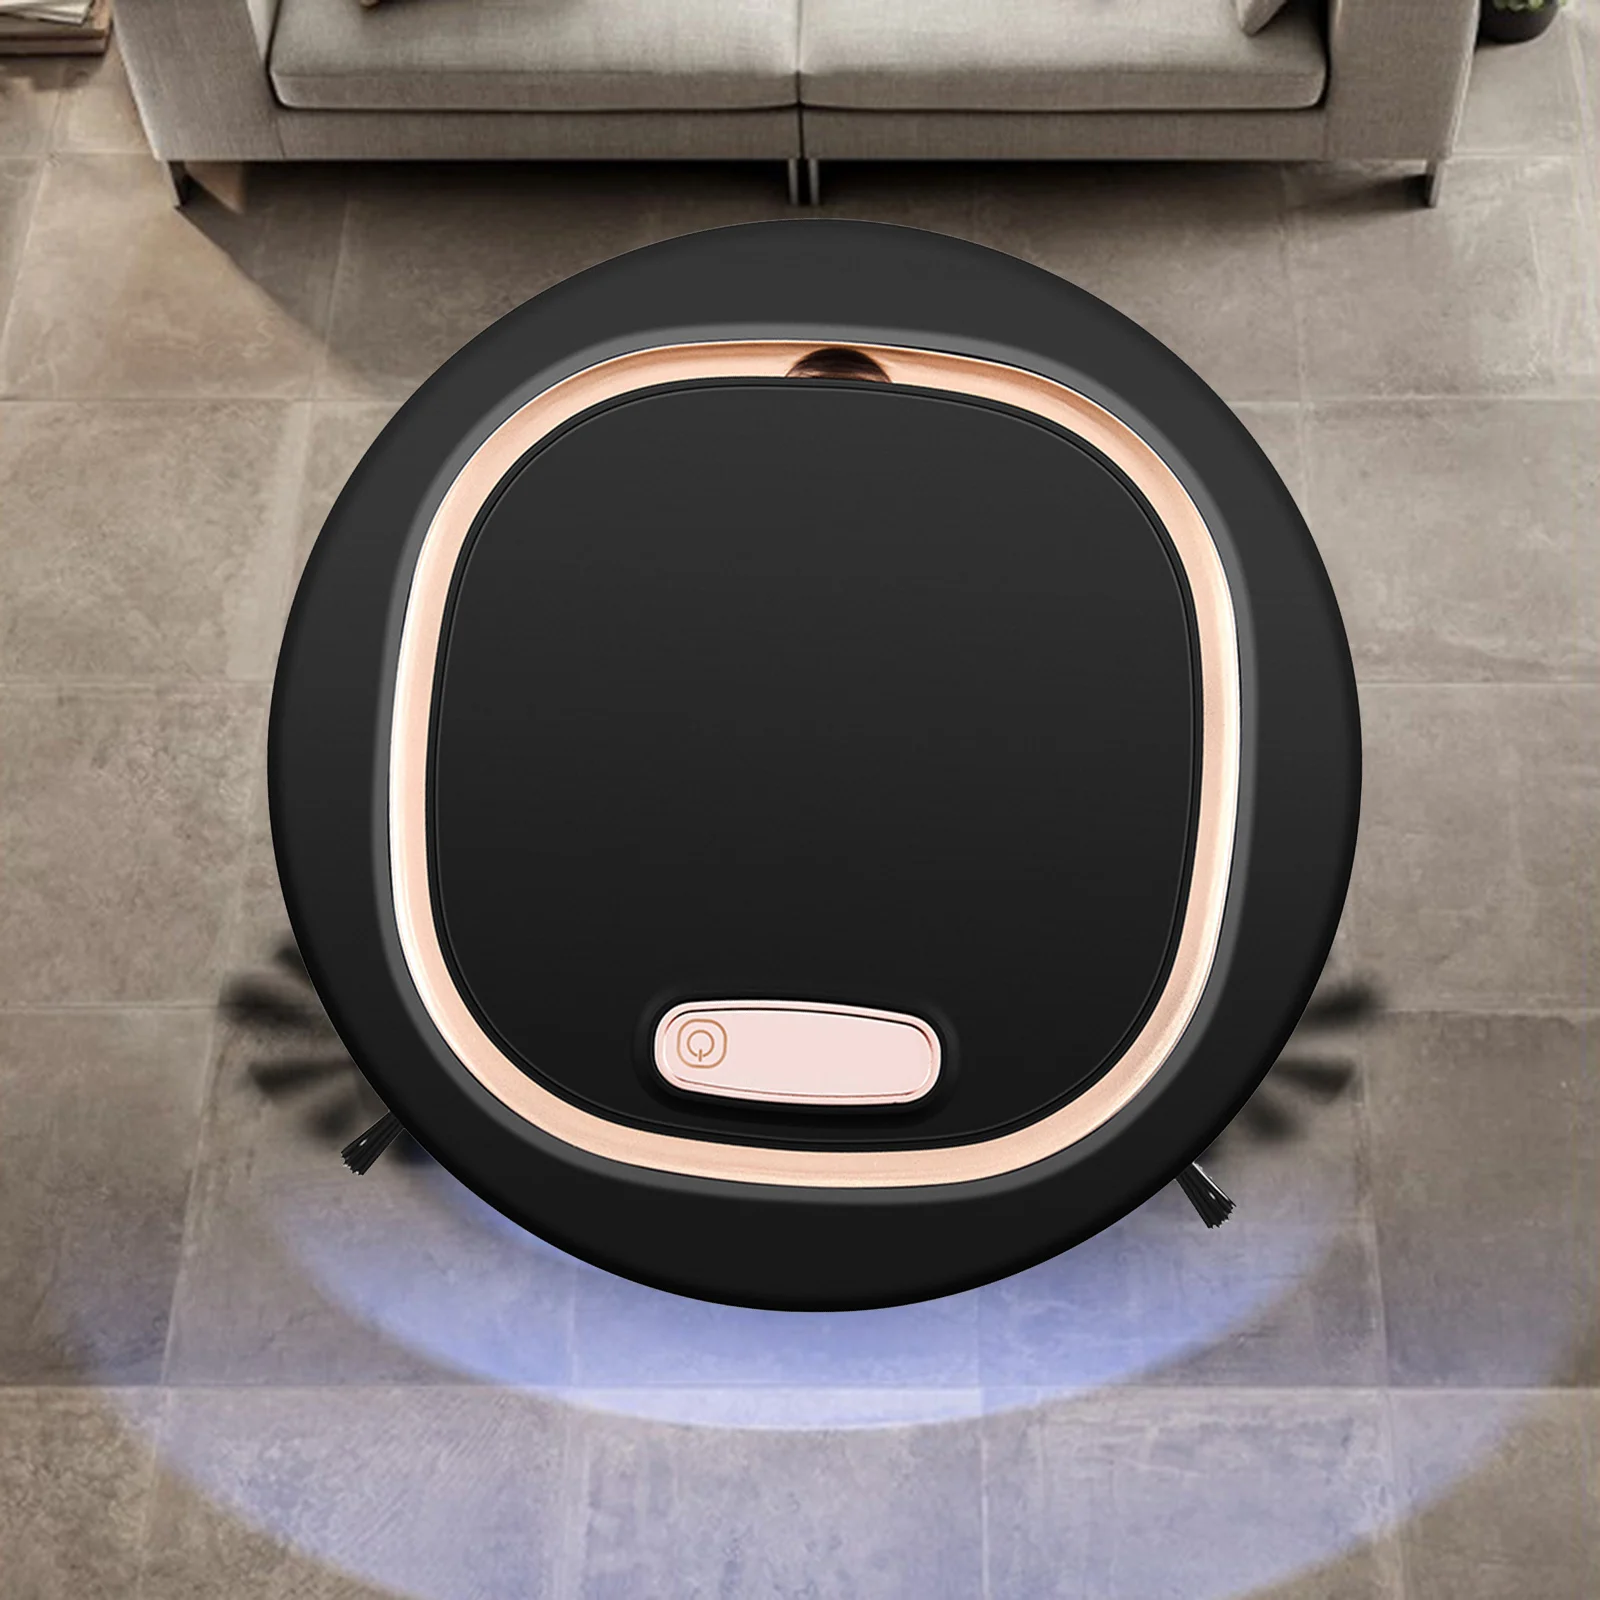 3 IN 1 Smart Robot Vacuum Cleaner Auto Cleaning Mopping Carpet Floor Sweeper